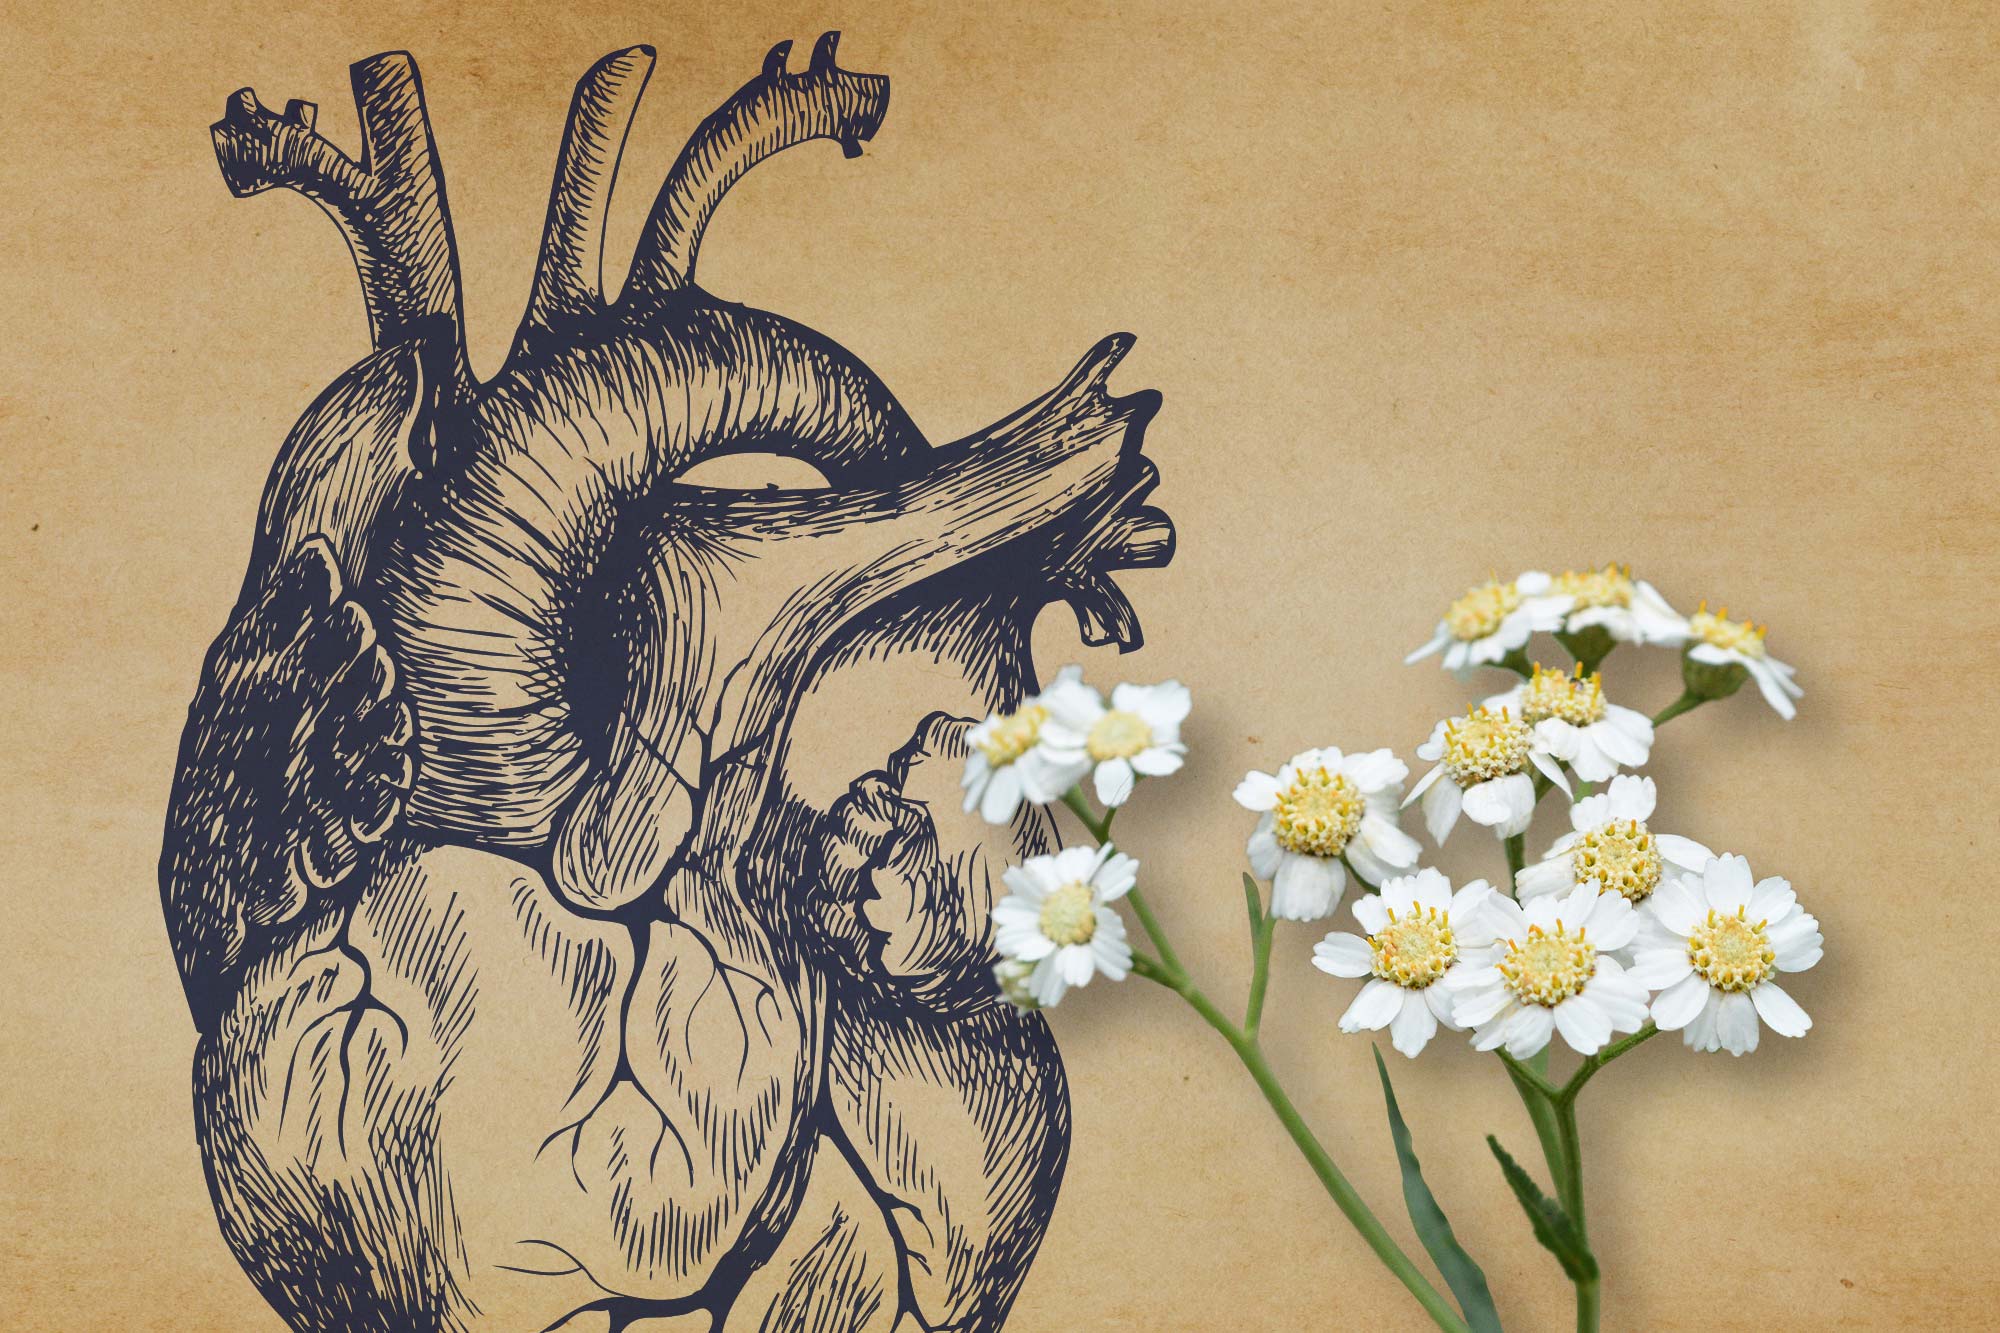 Illustration of a heart and small white flowers